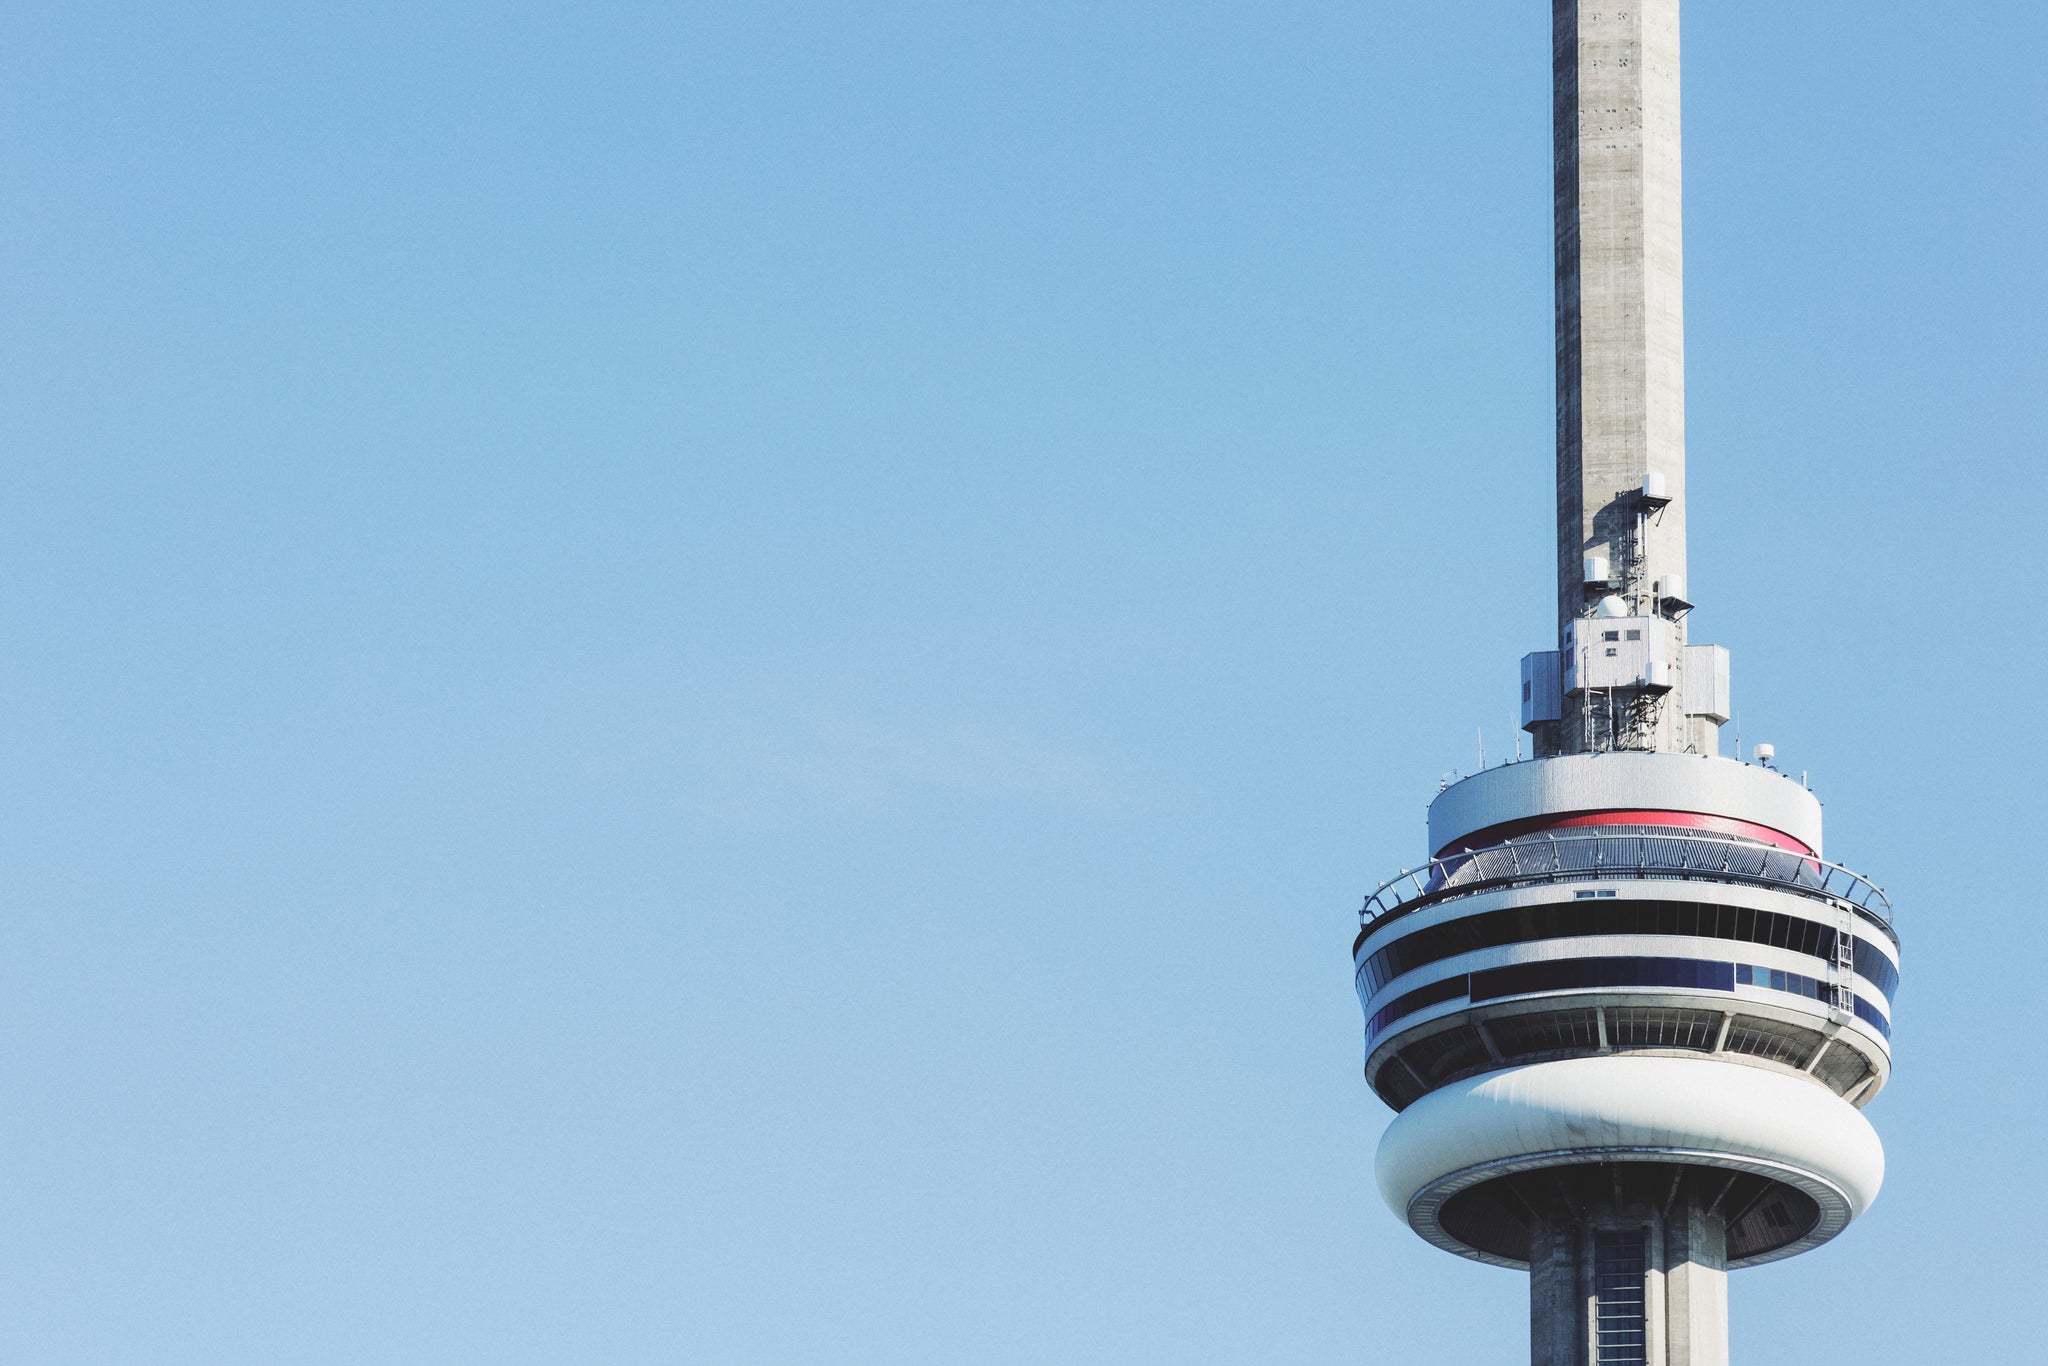 A photo of CN Tower, the land mark of Toronto, Canada